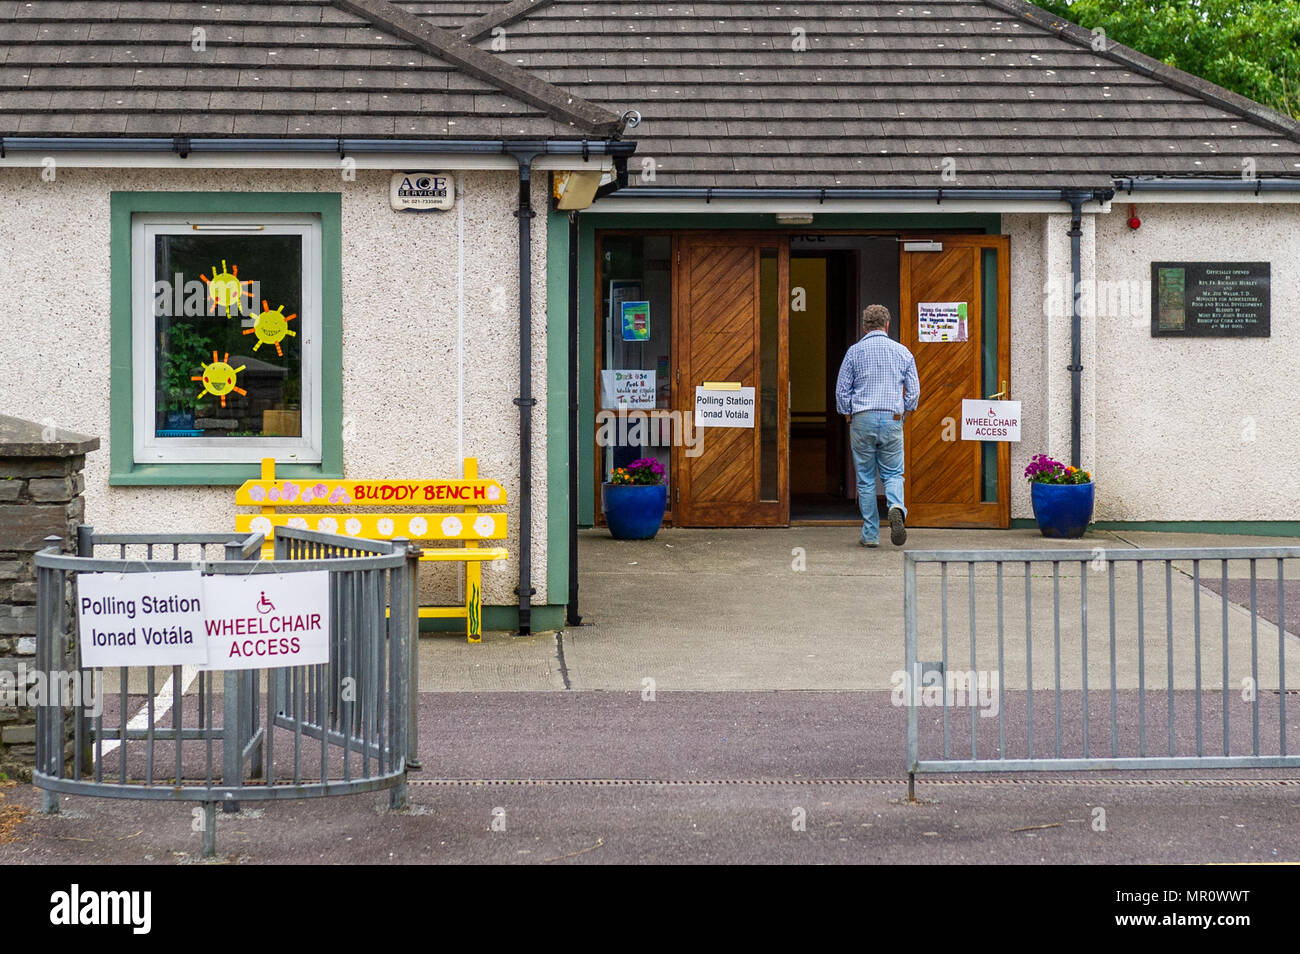 Schull, Ireland. 25th May, 2018. Today is referendum day on the Eighth Amendment of the Constitution Act 1983 which bans mothers from having abortions. The vote today is whether to retain or repeal the constitutional ban on abortion. A voter is pictured entering the polling station in Scoil Mhuire National School, Schull, West Cork, Ireland. Credit: Andy Gibson/Alamy Live News. Stock Photo